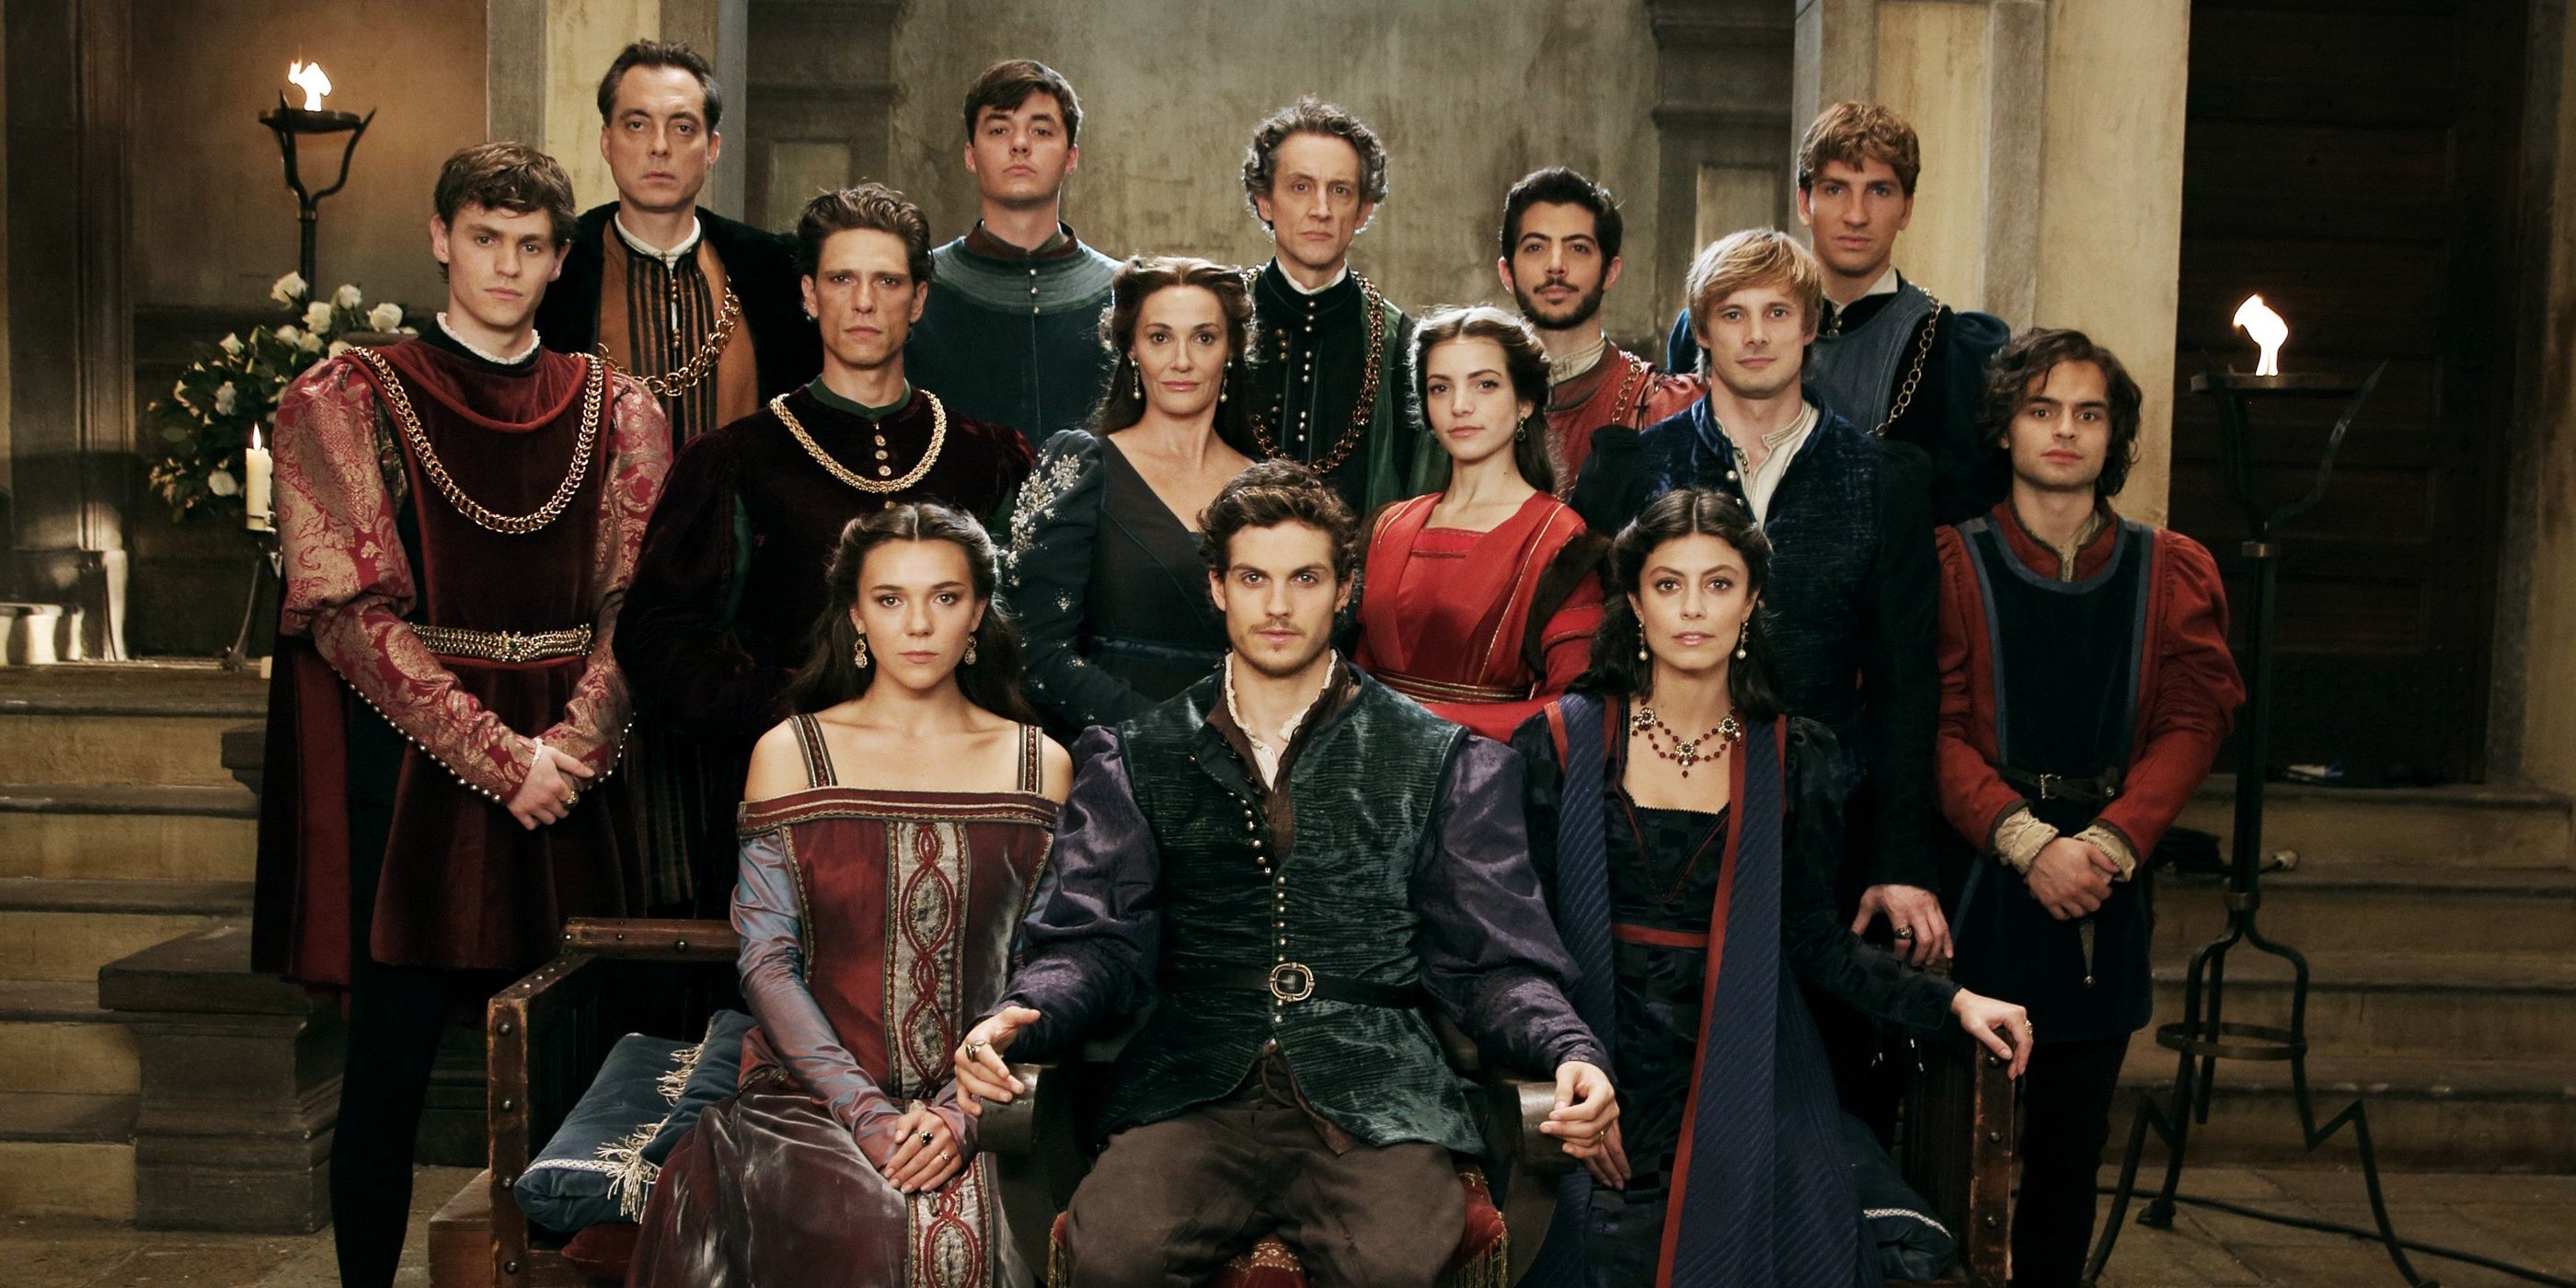 10 Shows To BingeWatch If You Love Historical Fiction (& Where To Watch Them)